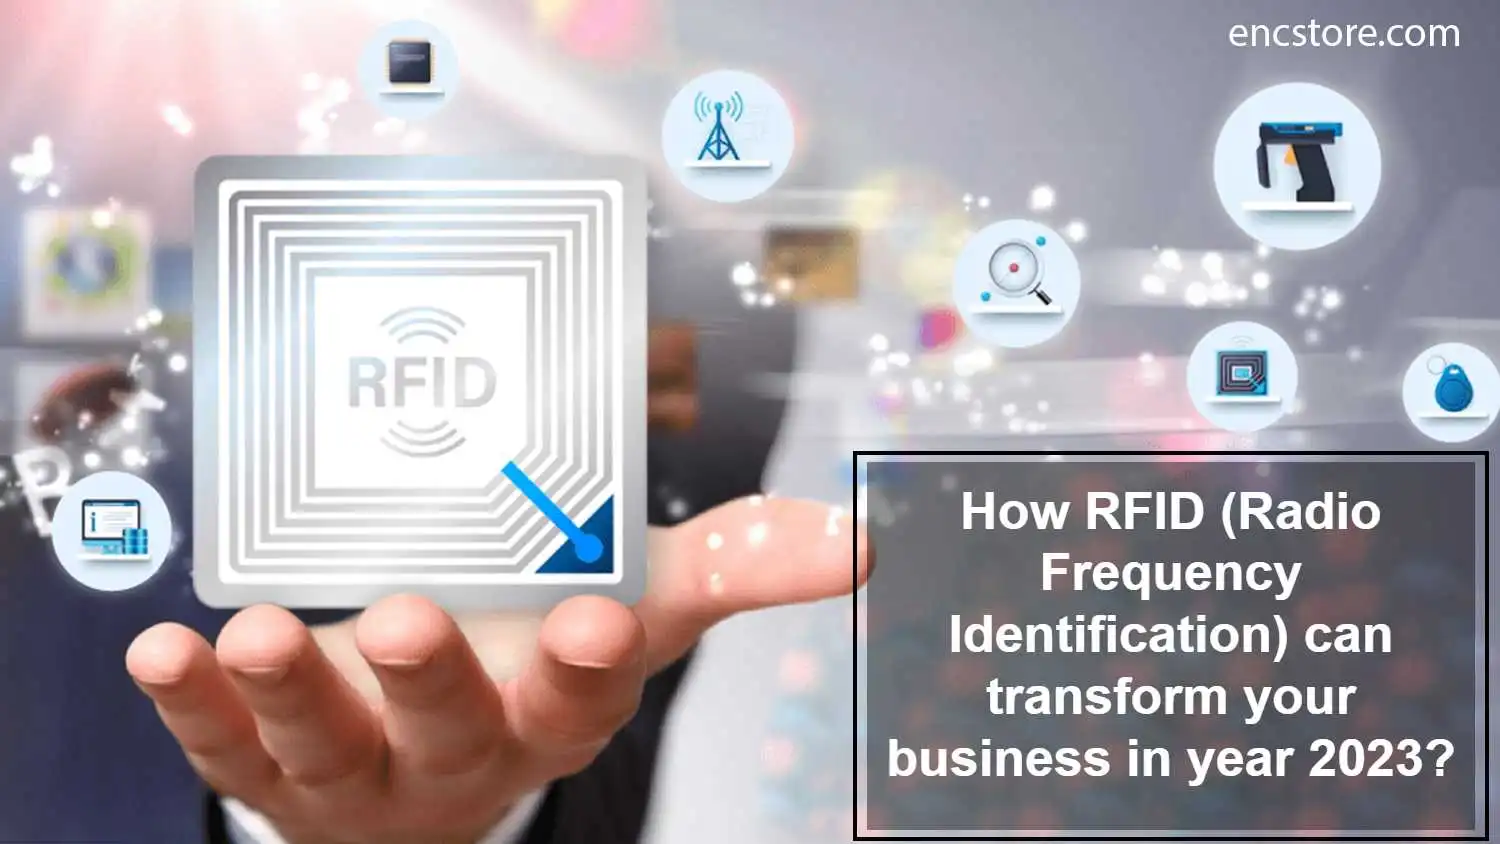 How RFID can transform your business